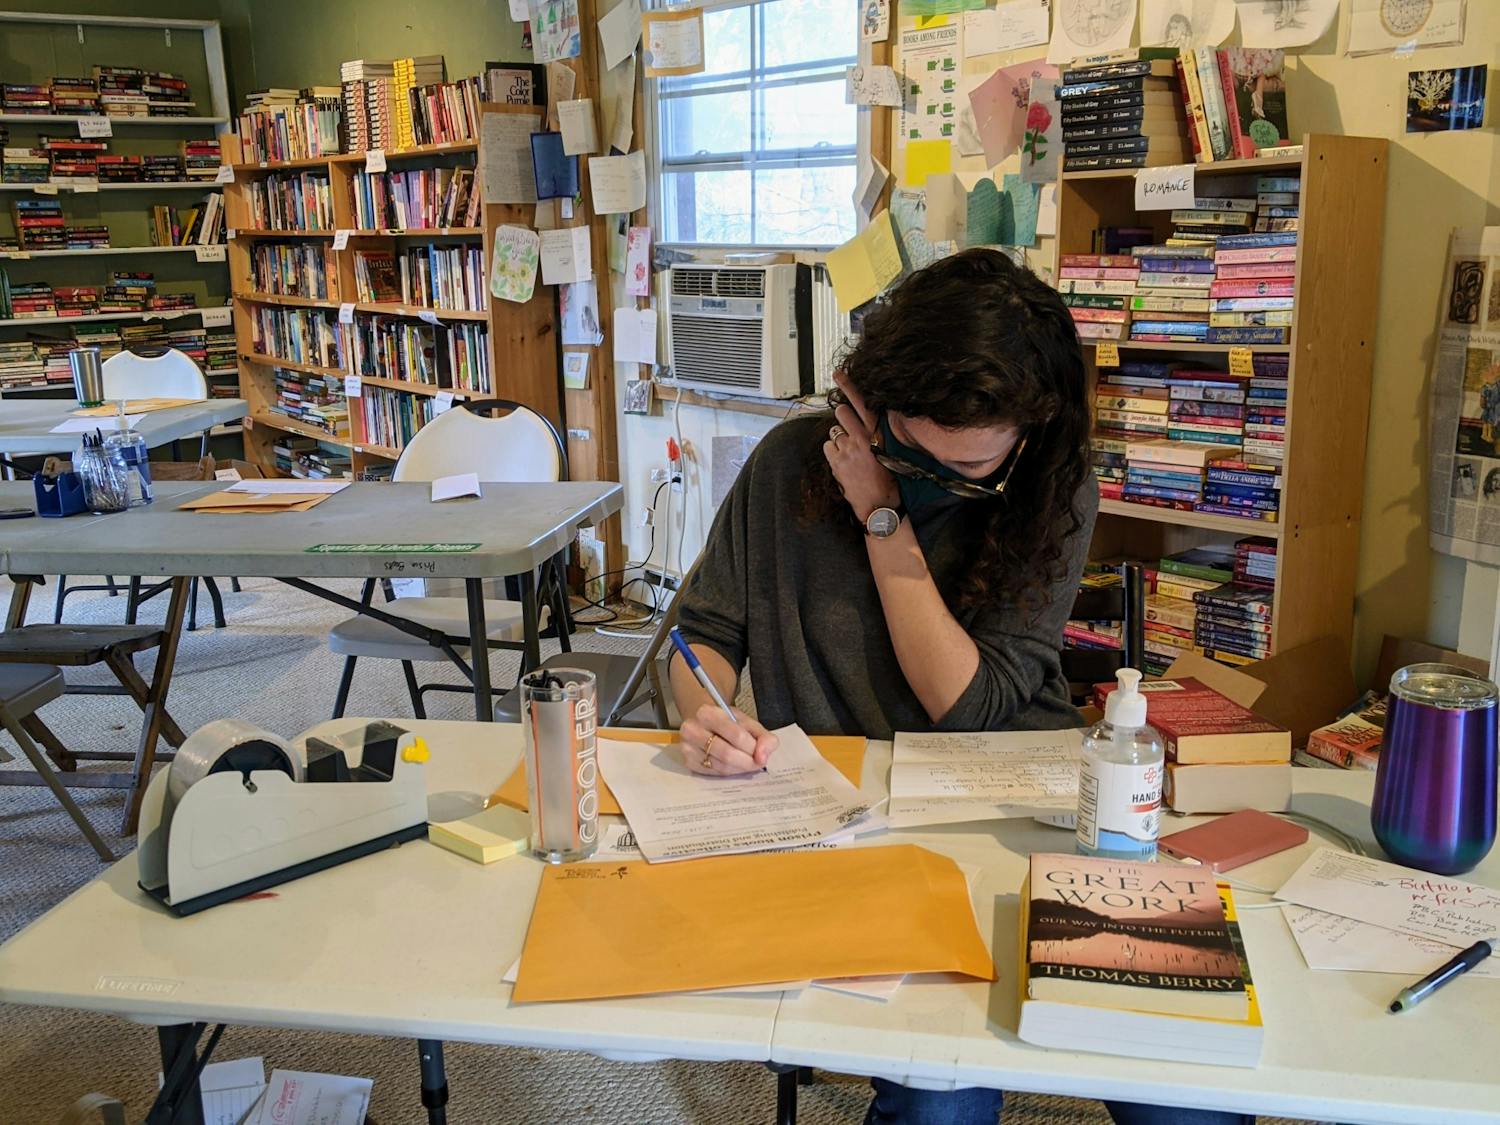 A volunteer answers a book request from an incarcerated individual. Photo courtesy of Liz Schlemmer.